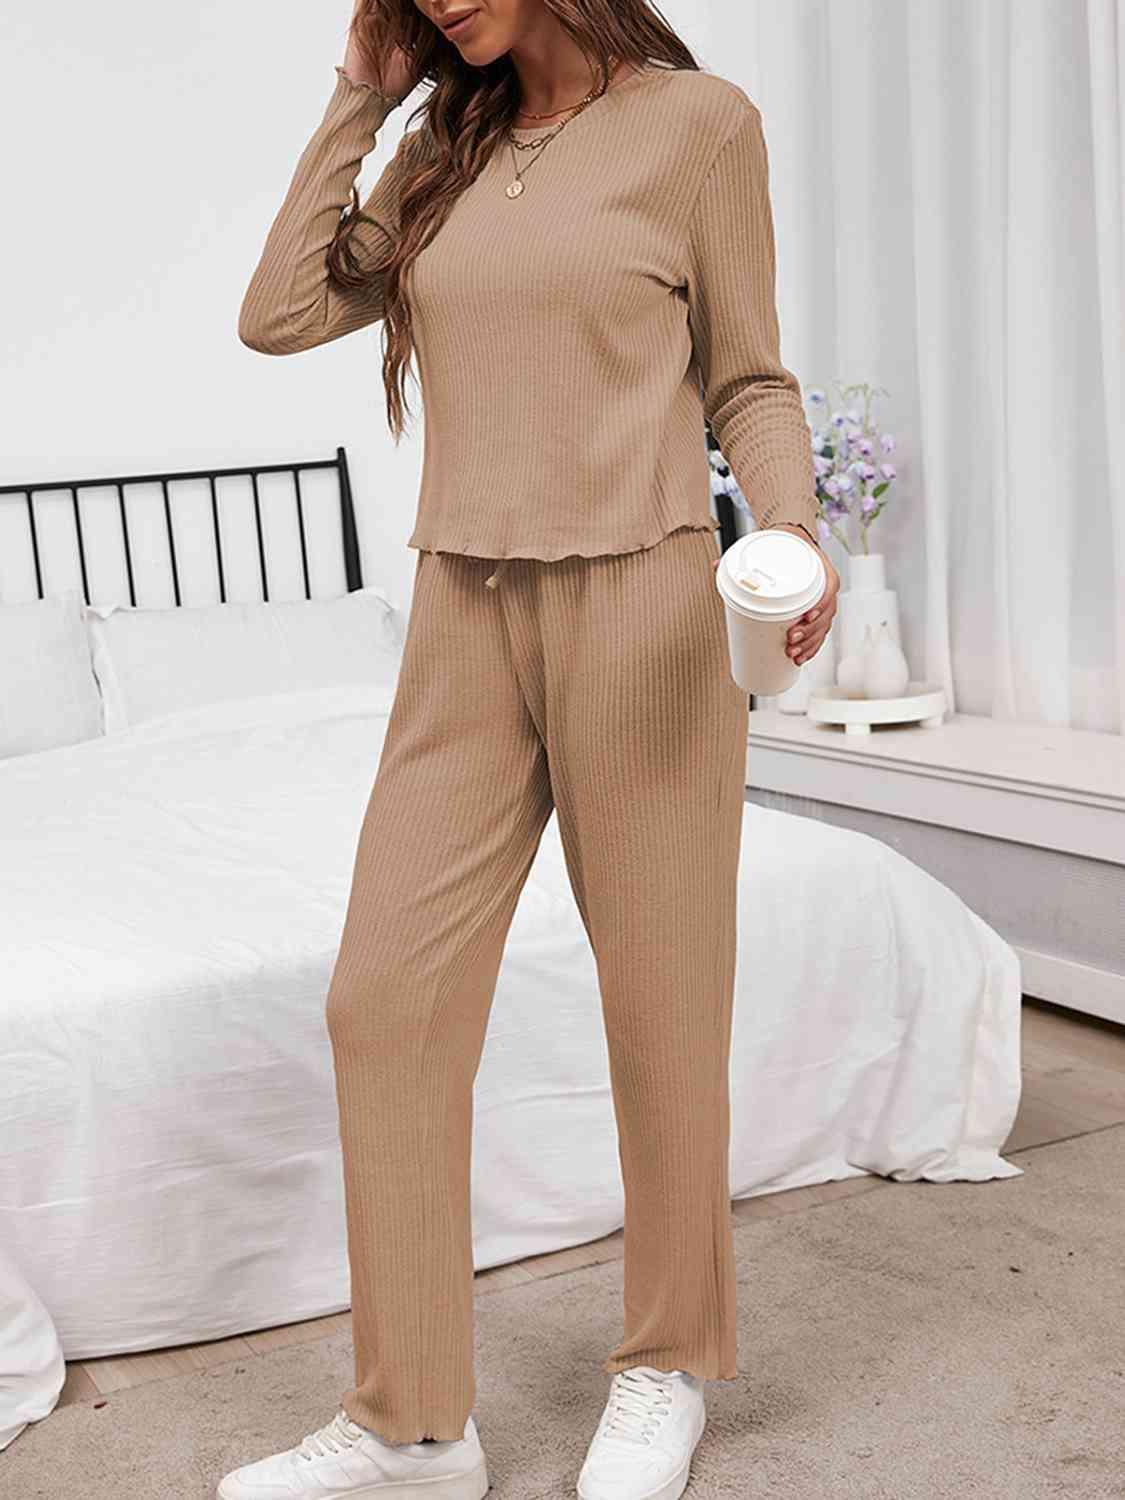 a woman standing in a bedroom wearing a tan outfit